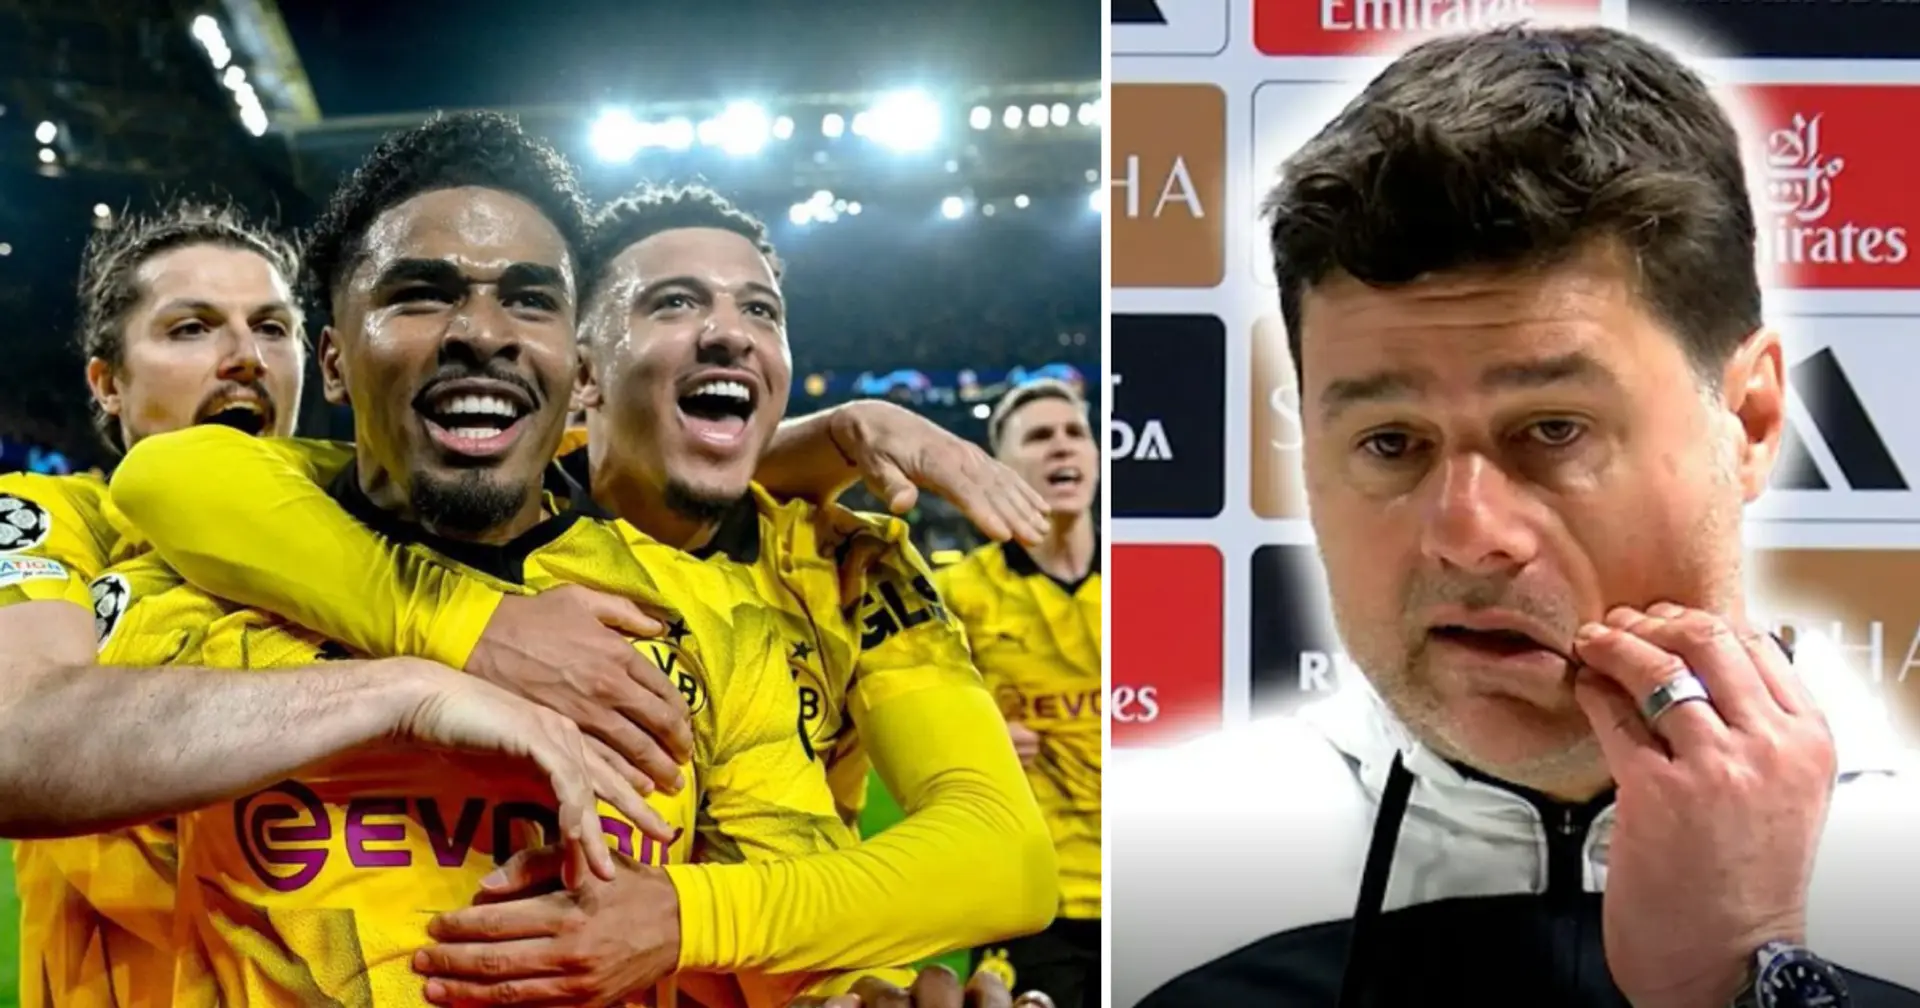 How Dortmund beating PSG affects Chelsea's chances to play in Europe next season — explained in 30 seconds